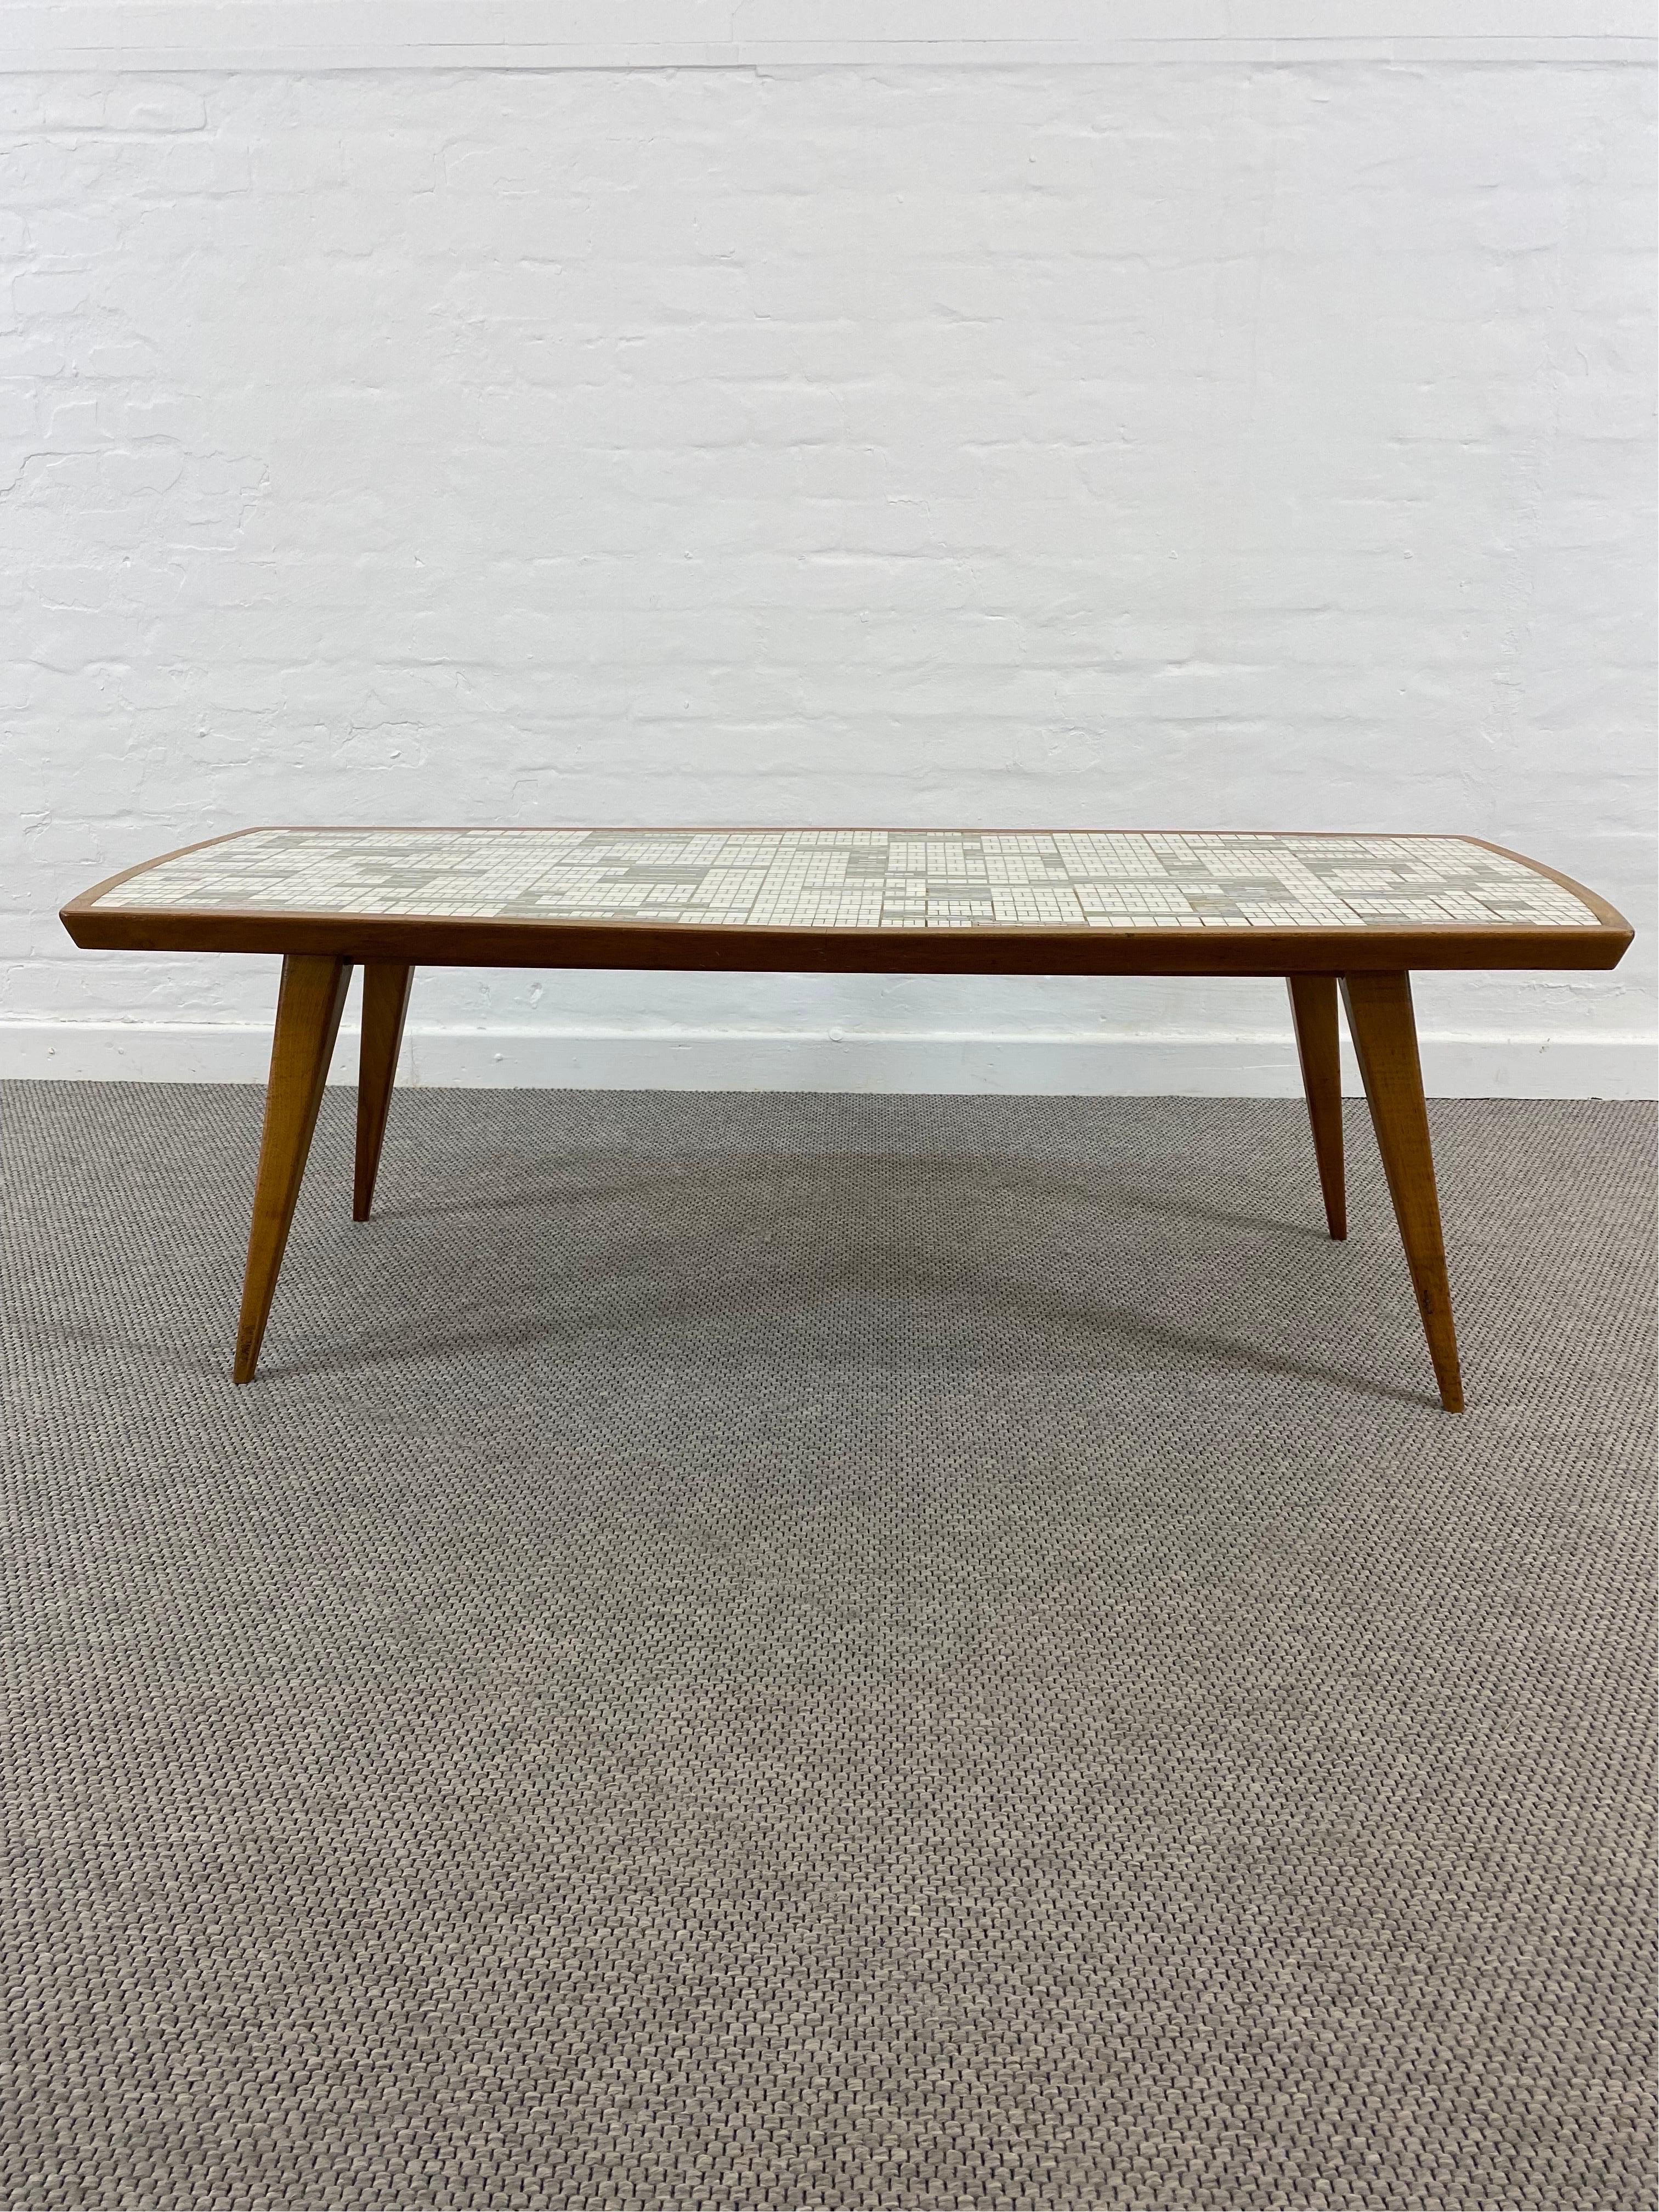 Glass Midcentury 50s Mosaic and Wood Coffee table by Berthold Müller-Oerlinghausen For Sale